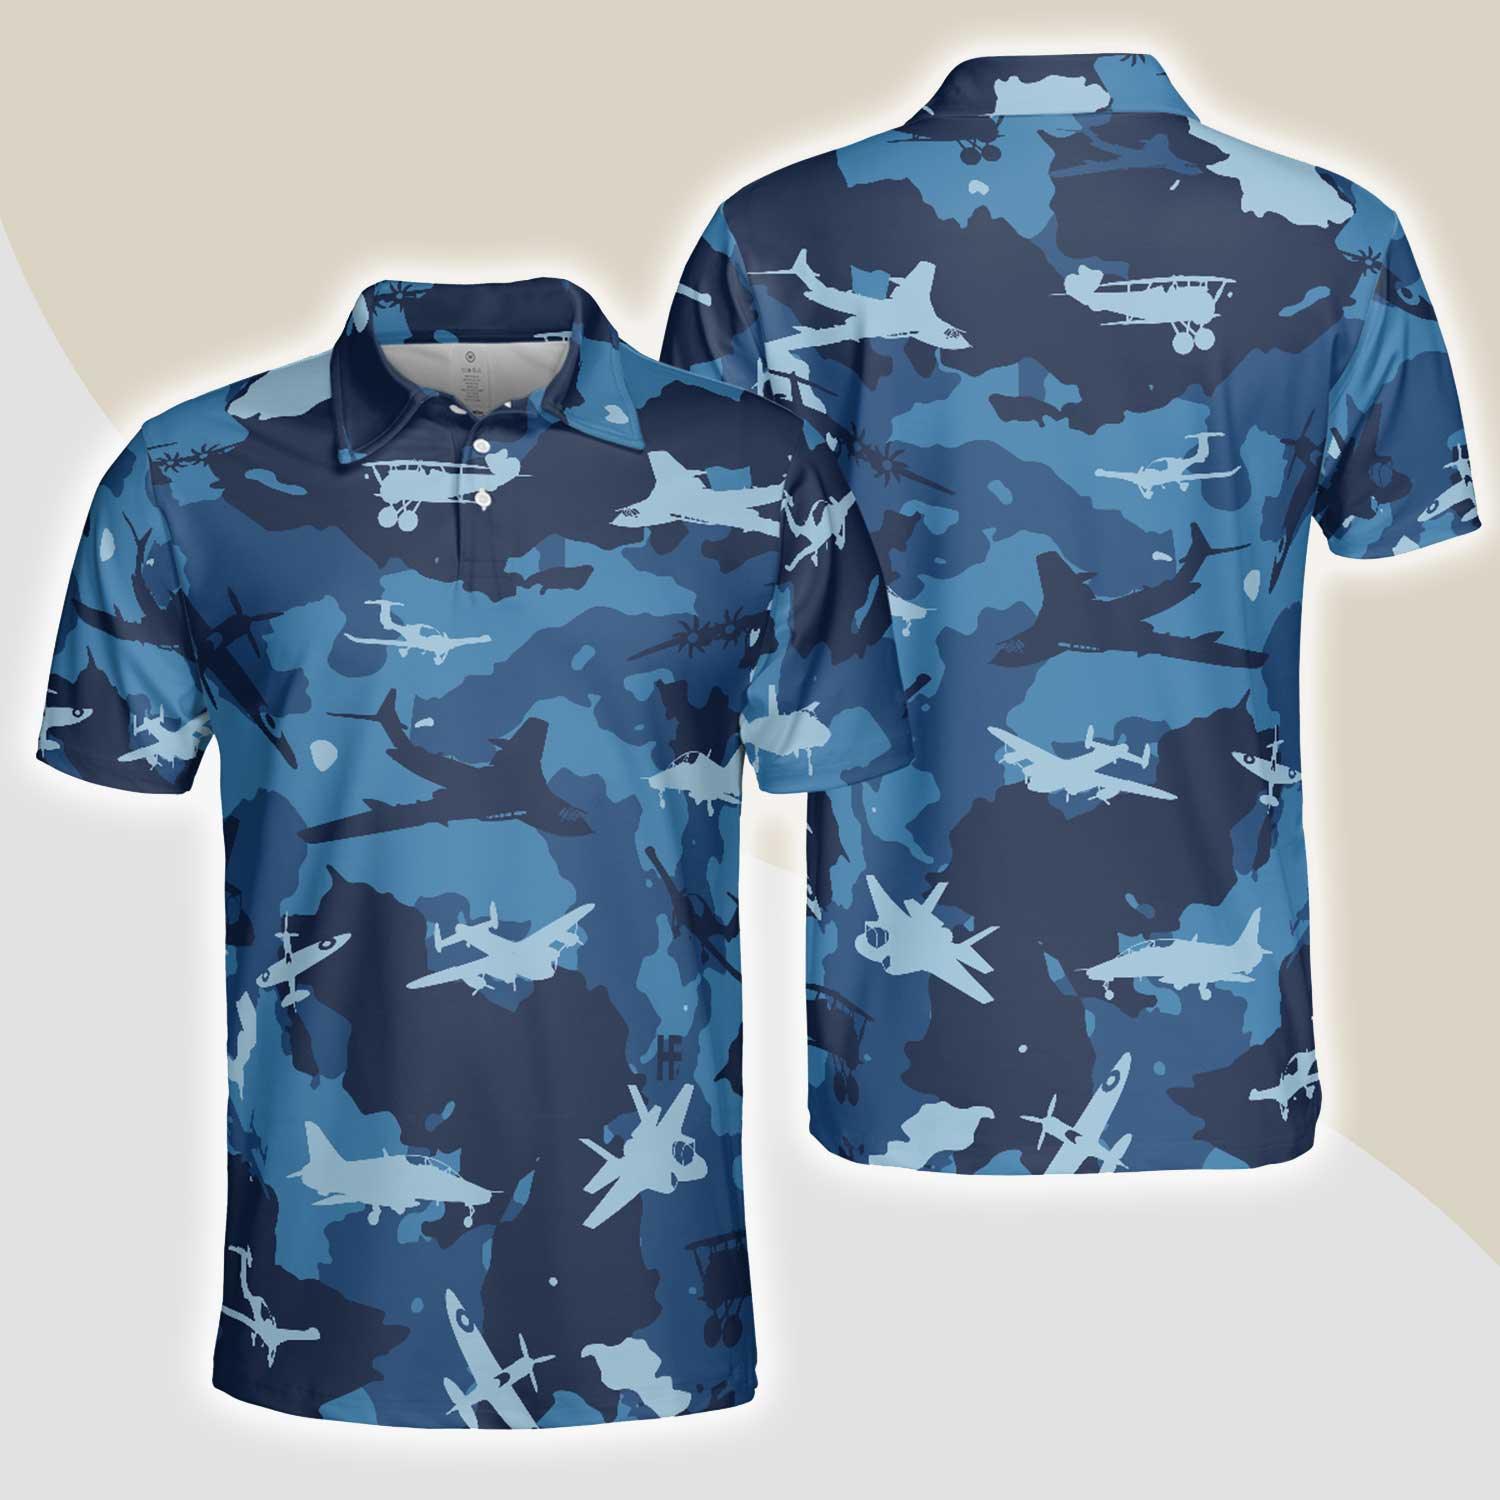 Army Men Polo Shirt, Aircraft Ocean Blue Camouflage Polo Shirt, Best Camo Shirt For Men - Best Gift For Army, Family, Friends - Amzanimalsgift